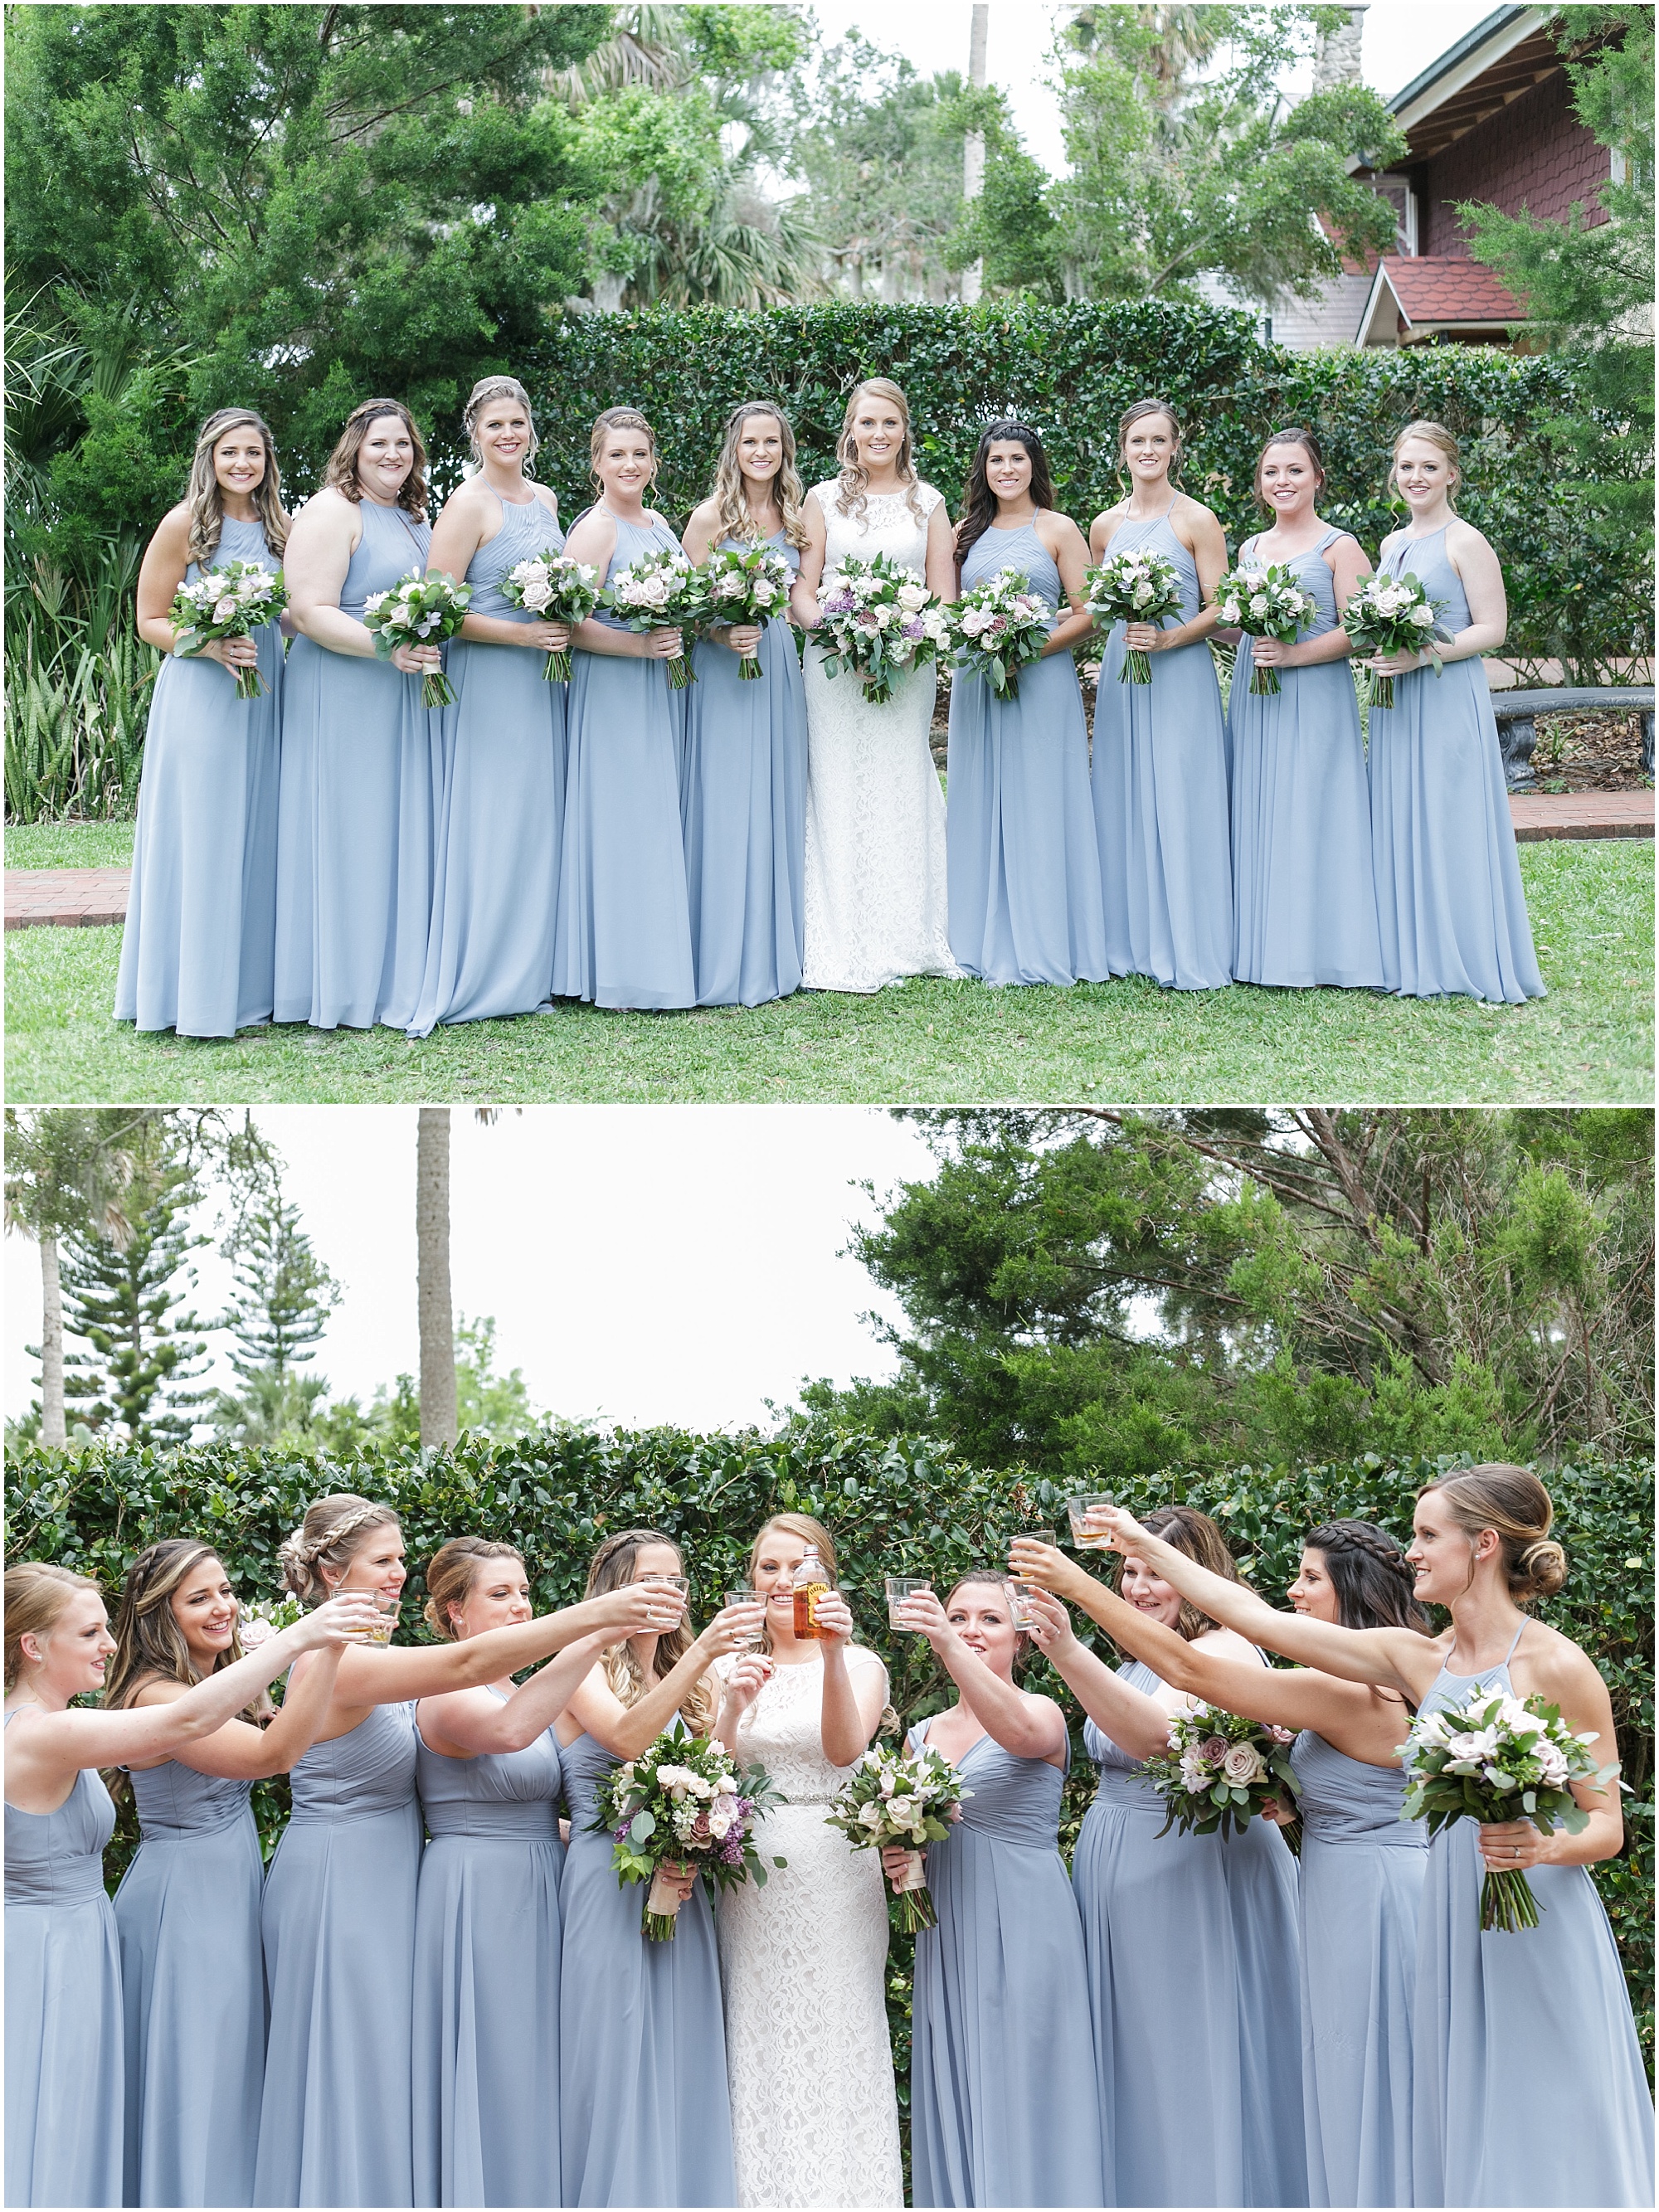 Bride posing with her bridesmaids and doing a toast.